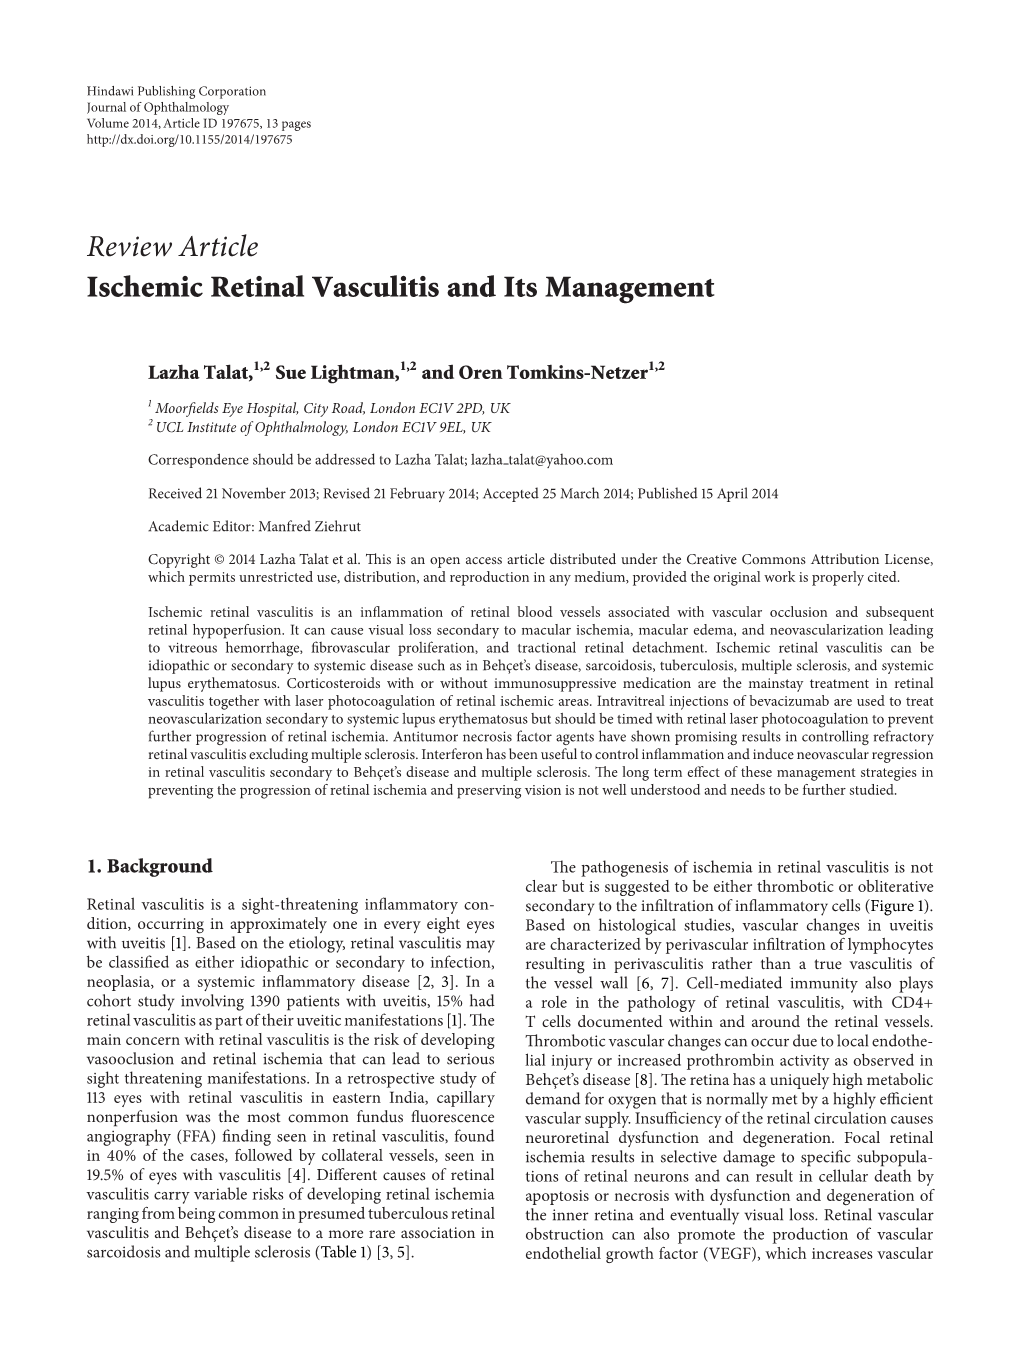 Review Article Ischemic Retinal Vasculitis and Its Management